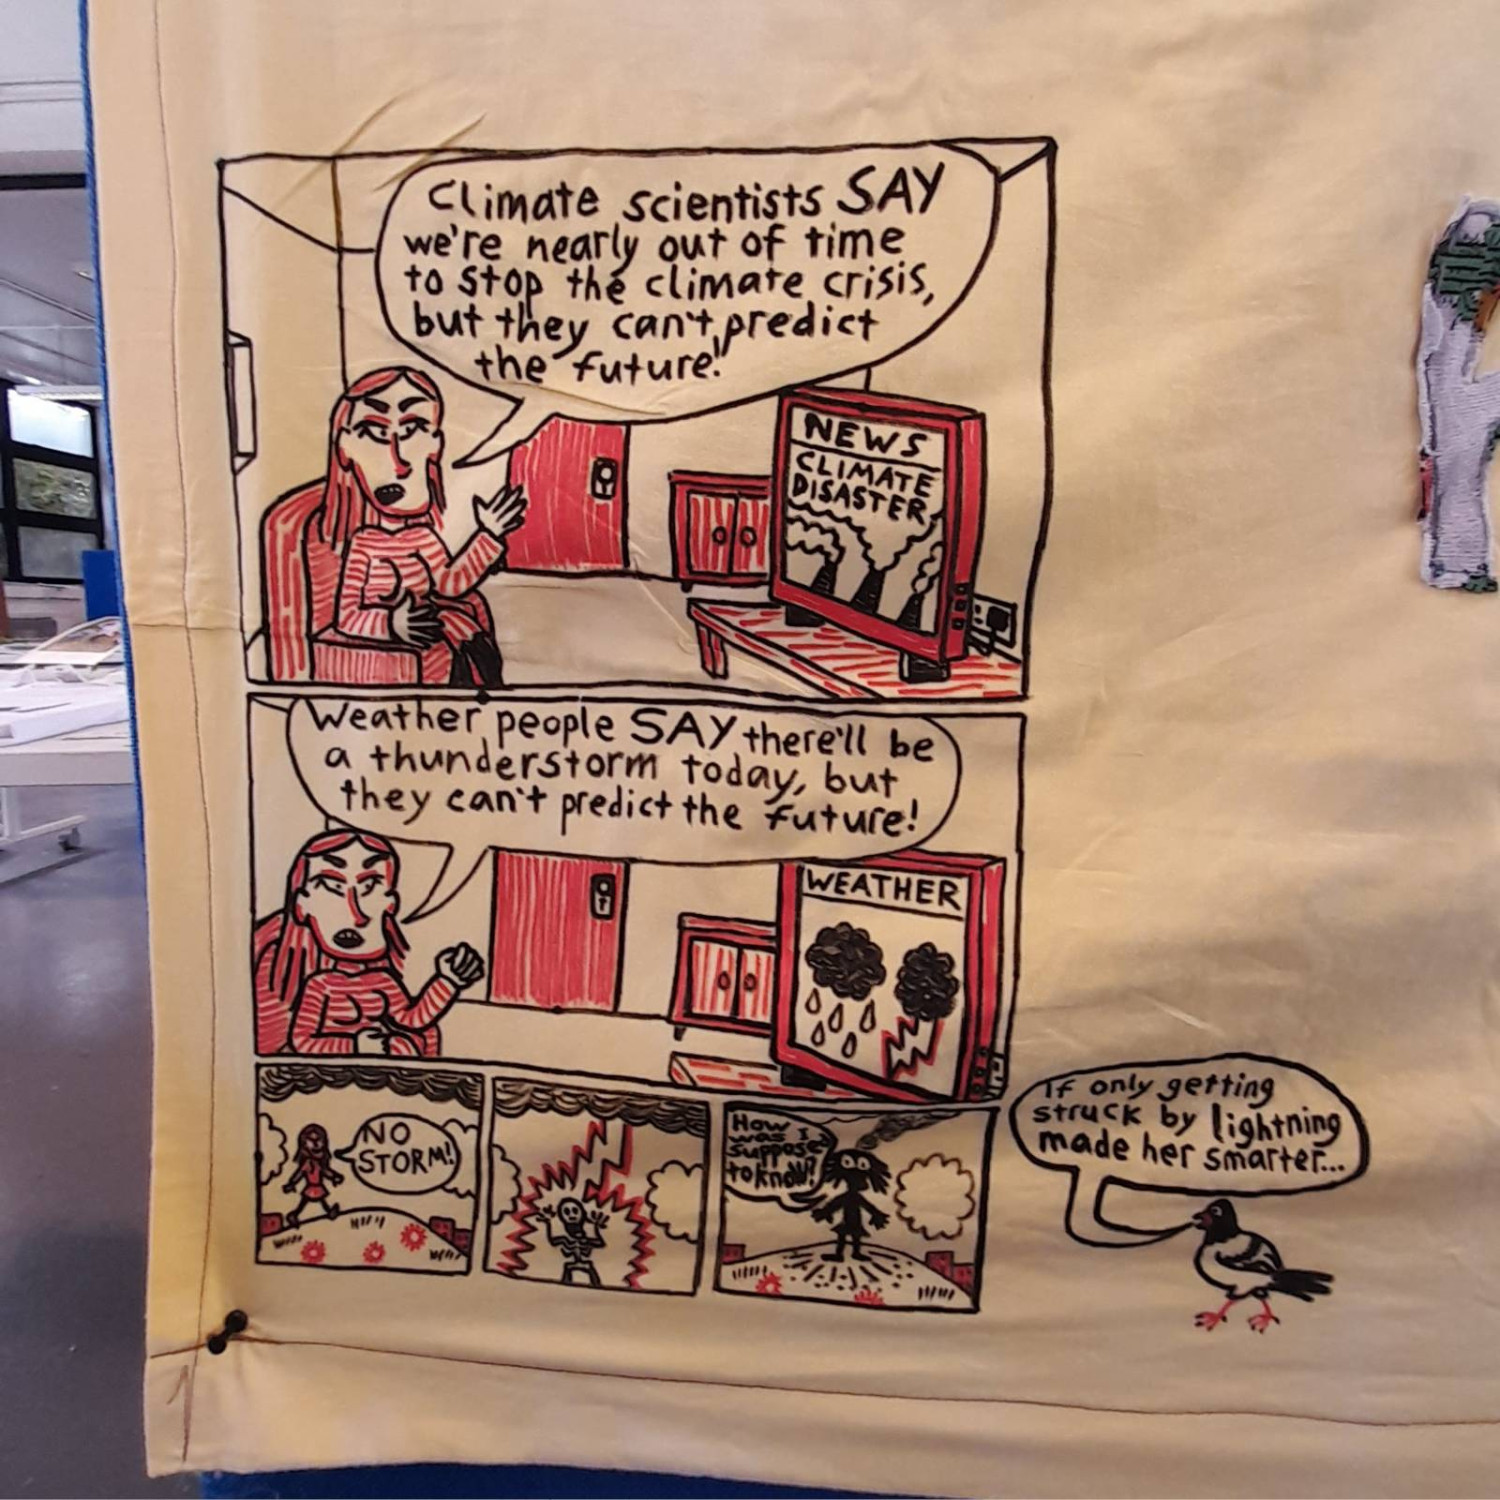 A close up on the banner, showing a comic